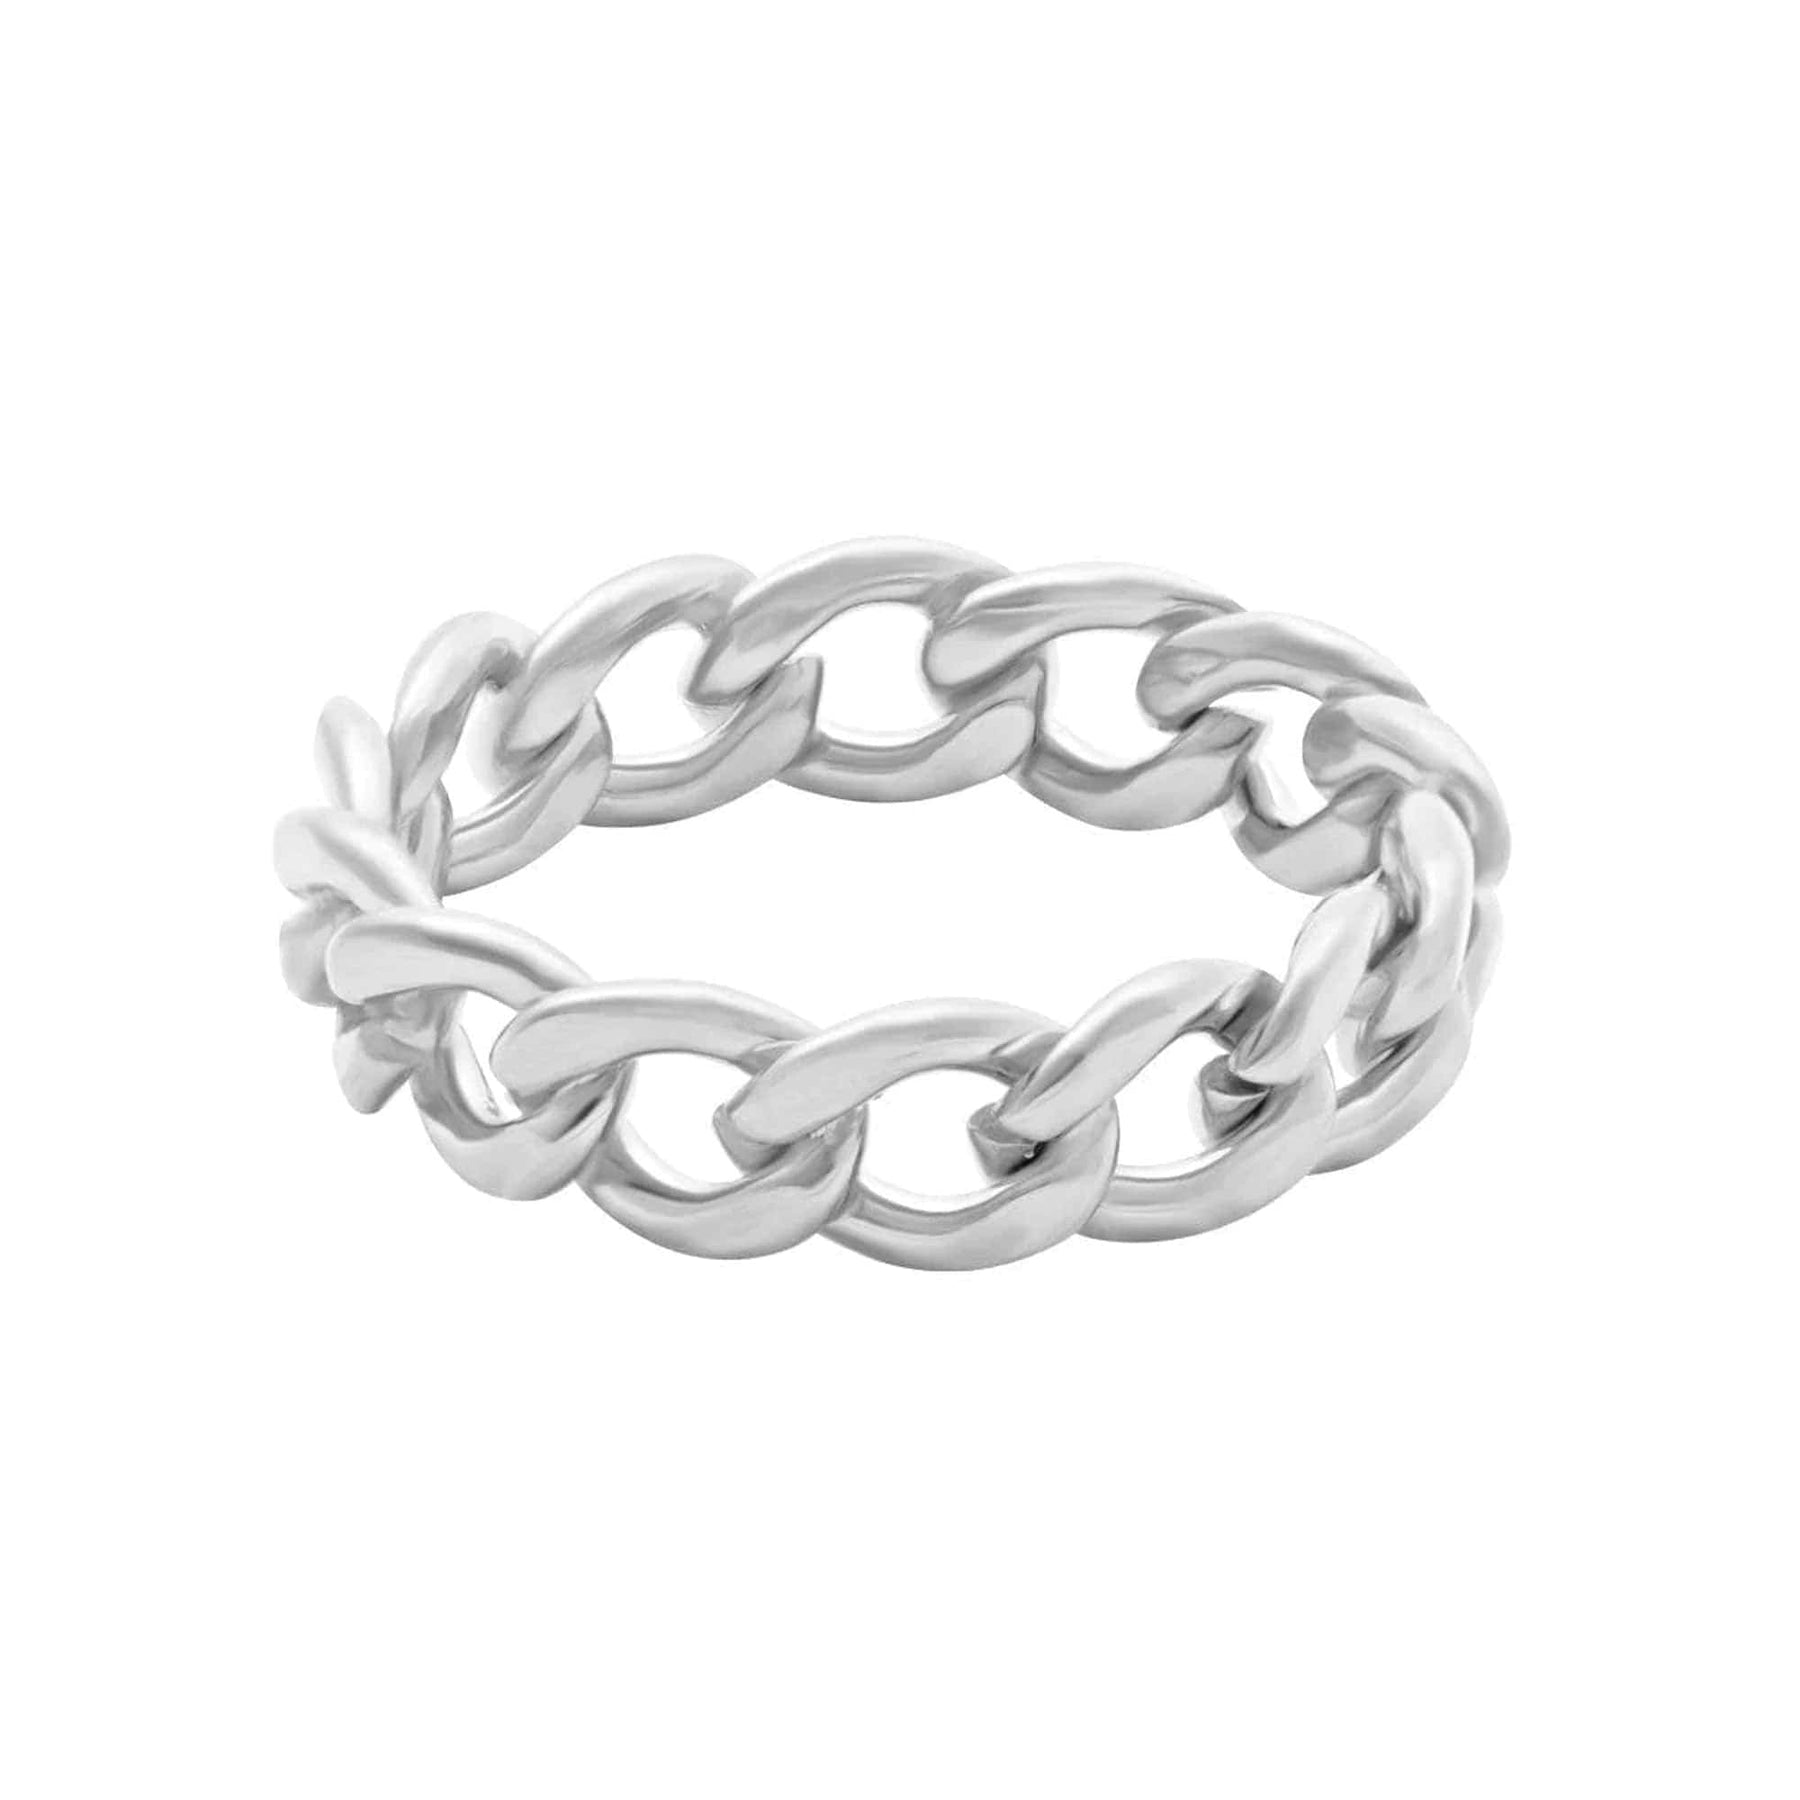 BohoMoon Stainless Steel Kenya Chain Ring Silver / US 6 / UK L / EUR 51 (small)